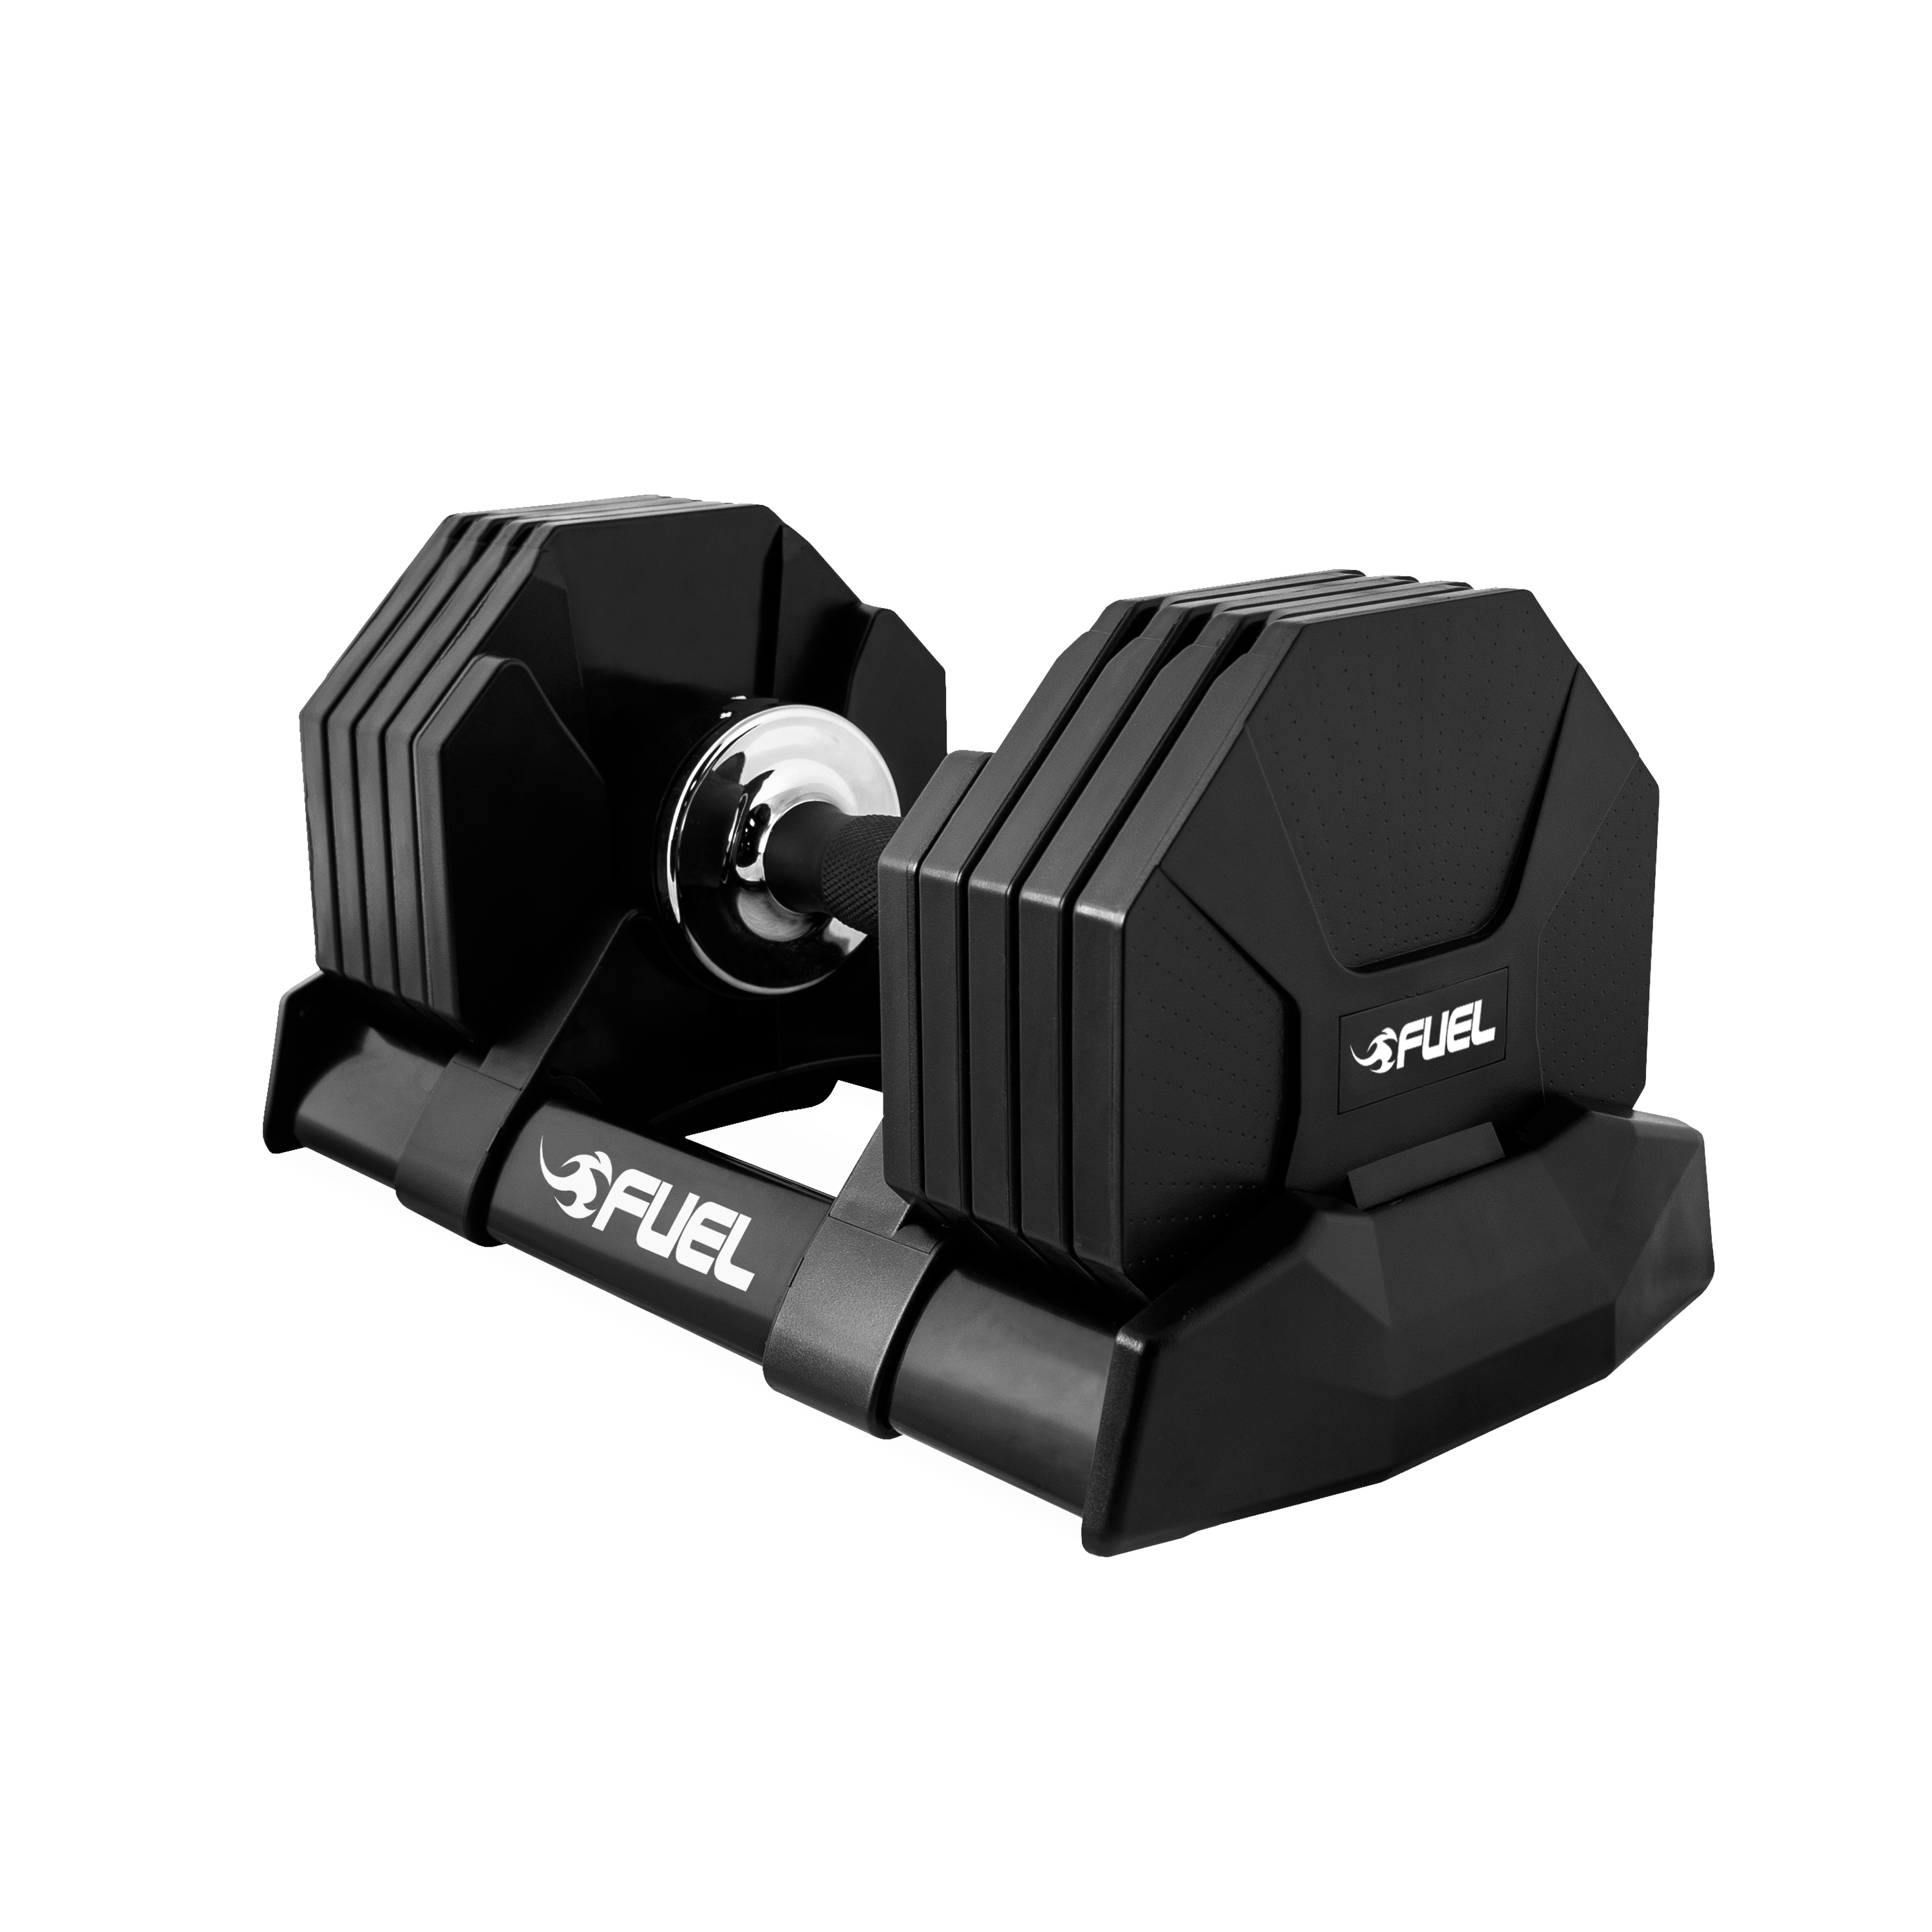 FUEL Pureformance Adjustabell Dumbbell, Quick Select 5-50 Pounds, Single $169.99